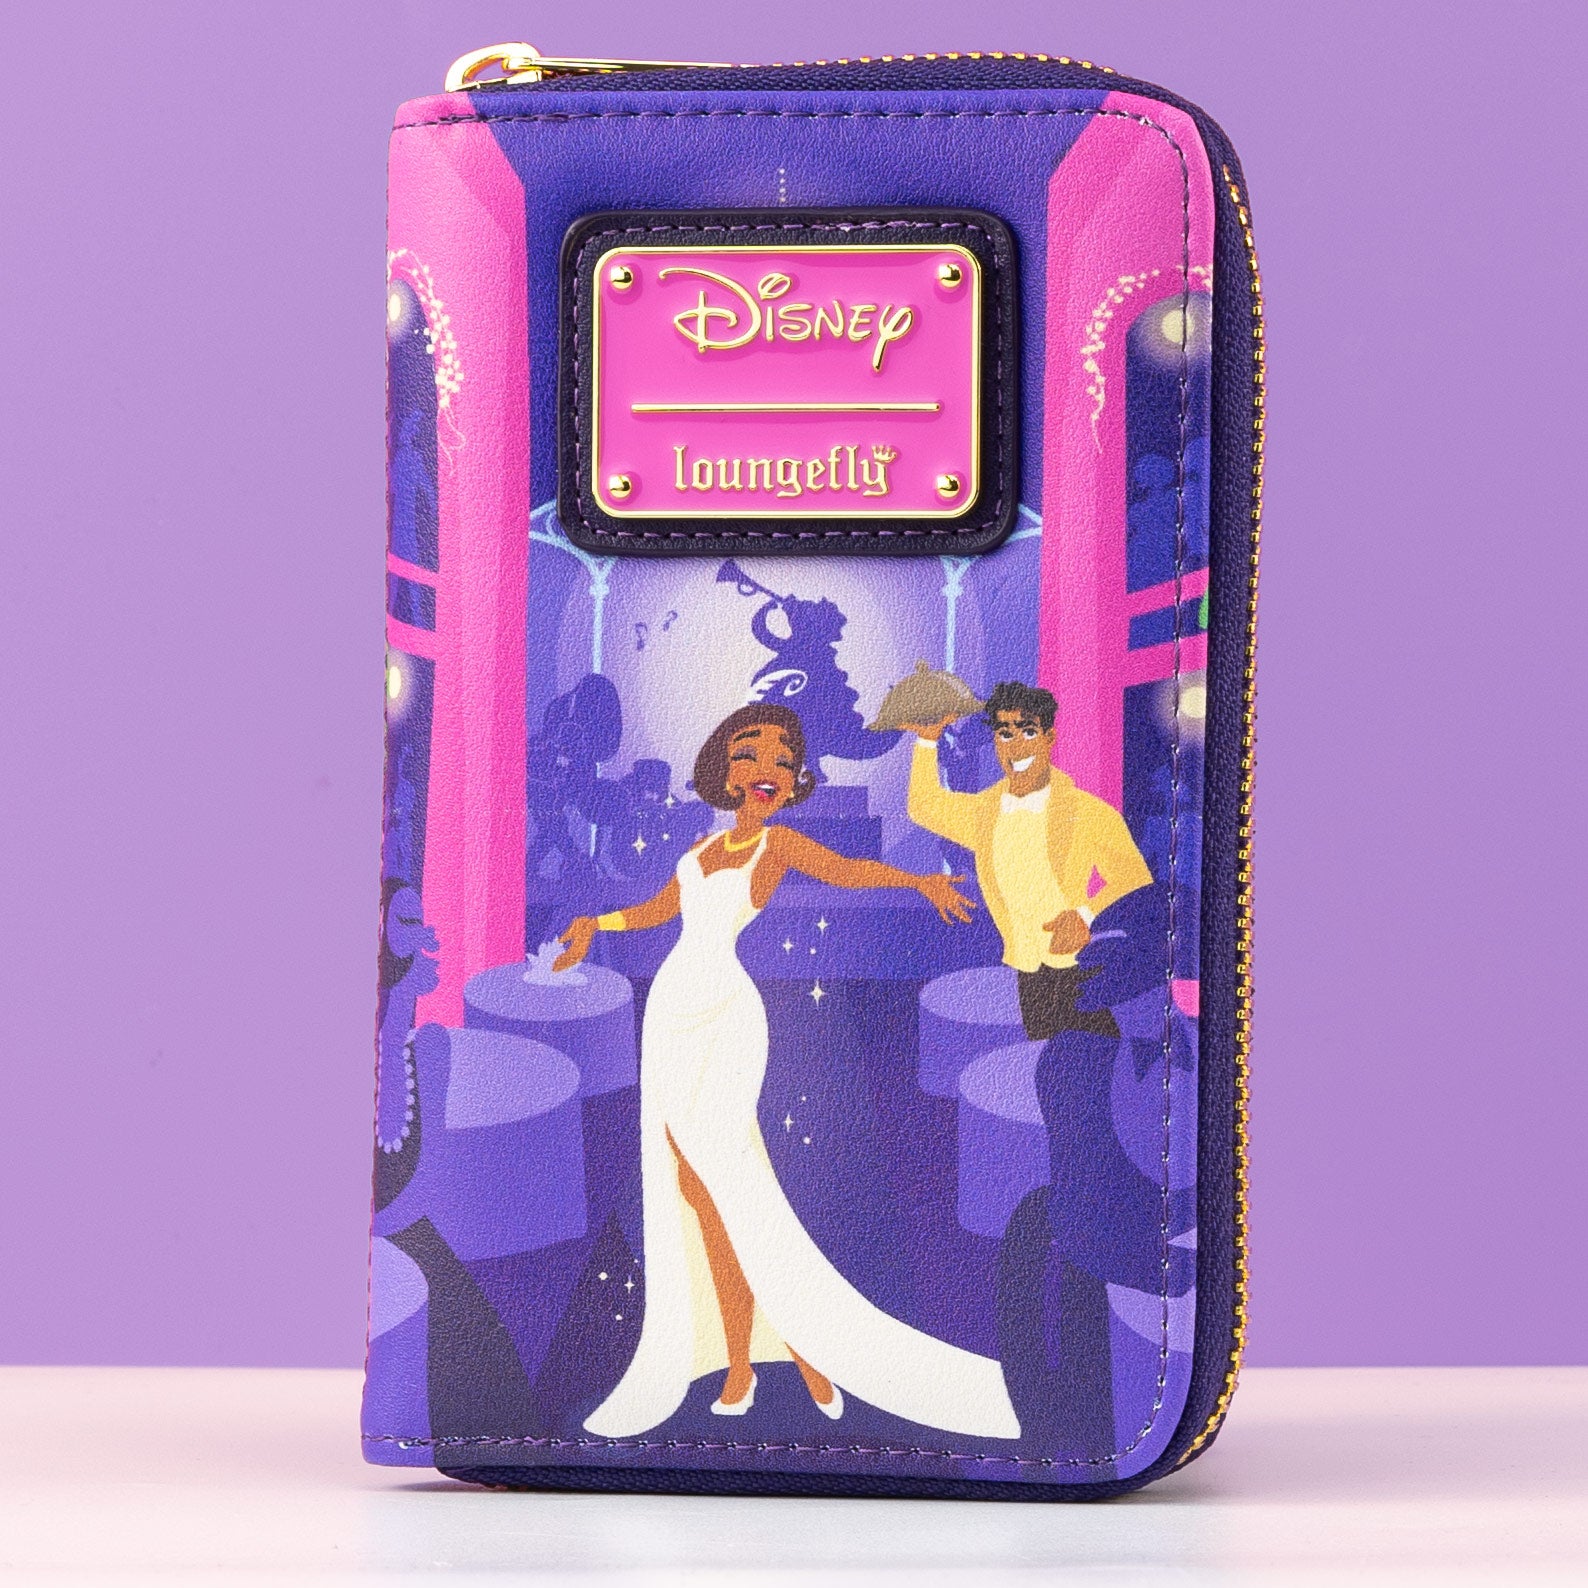 Loungefly x Disney The Princess and the Frog Tiana's Palace Purse